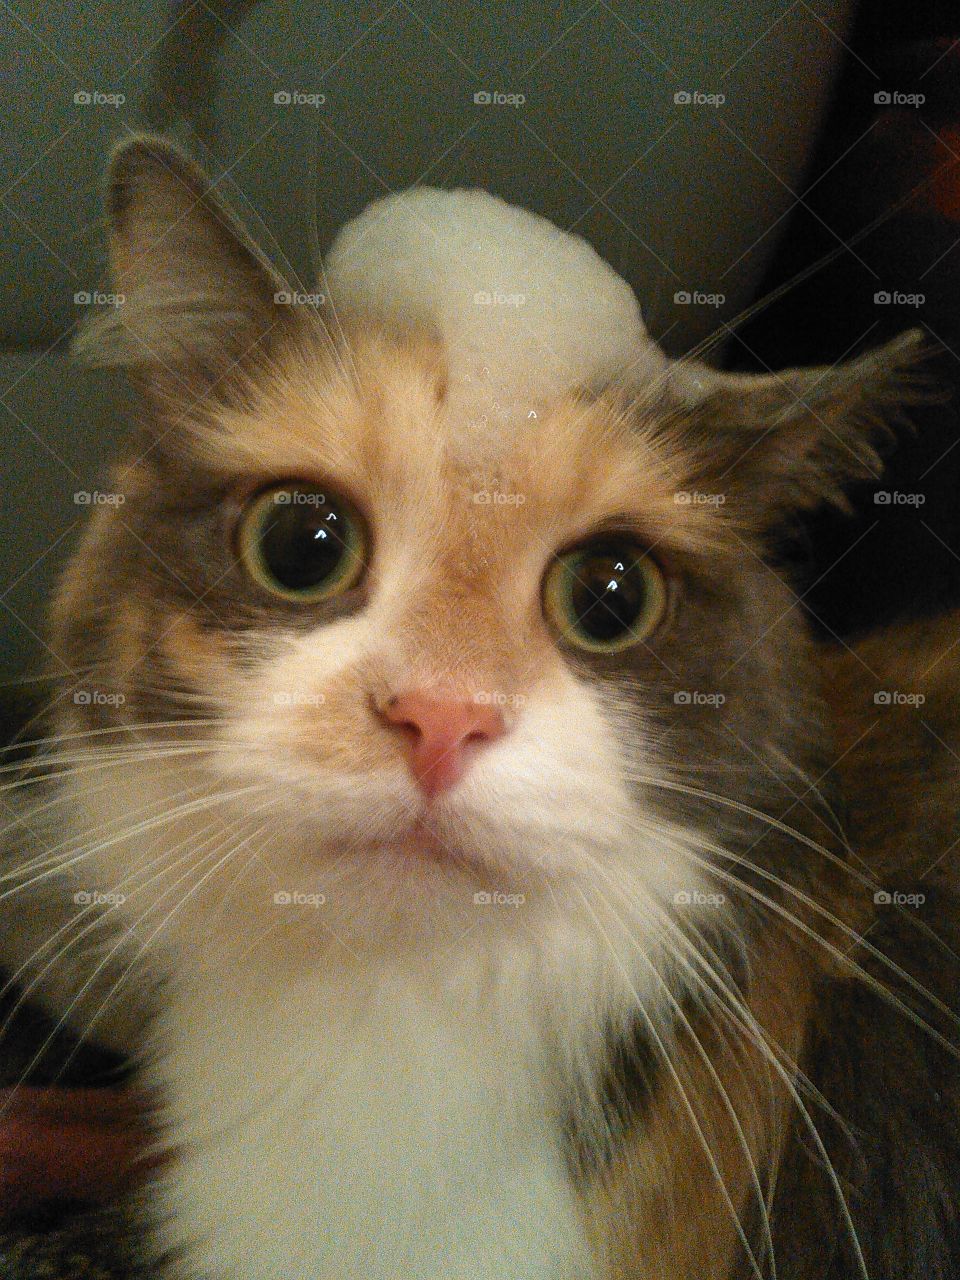 Baby kitty. put bubble bath bubbles on her head